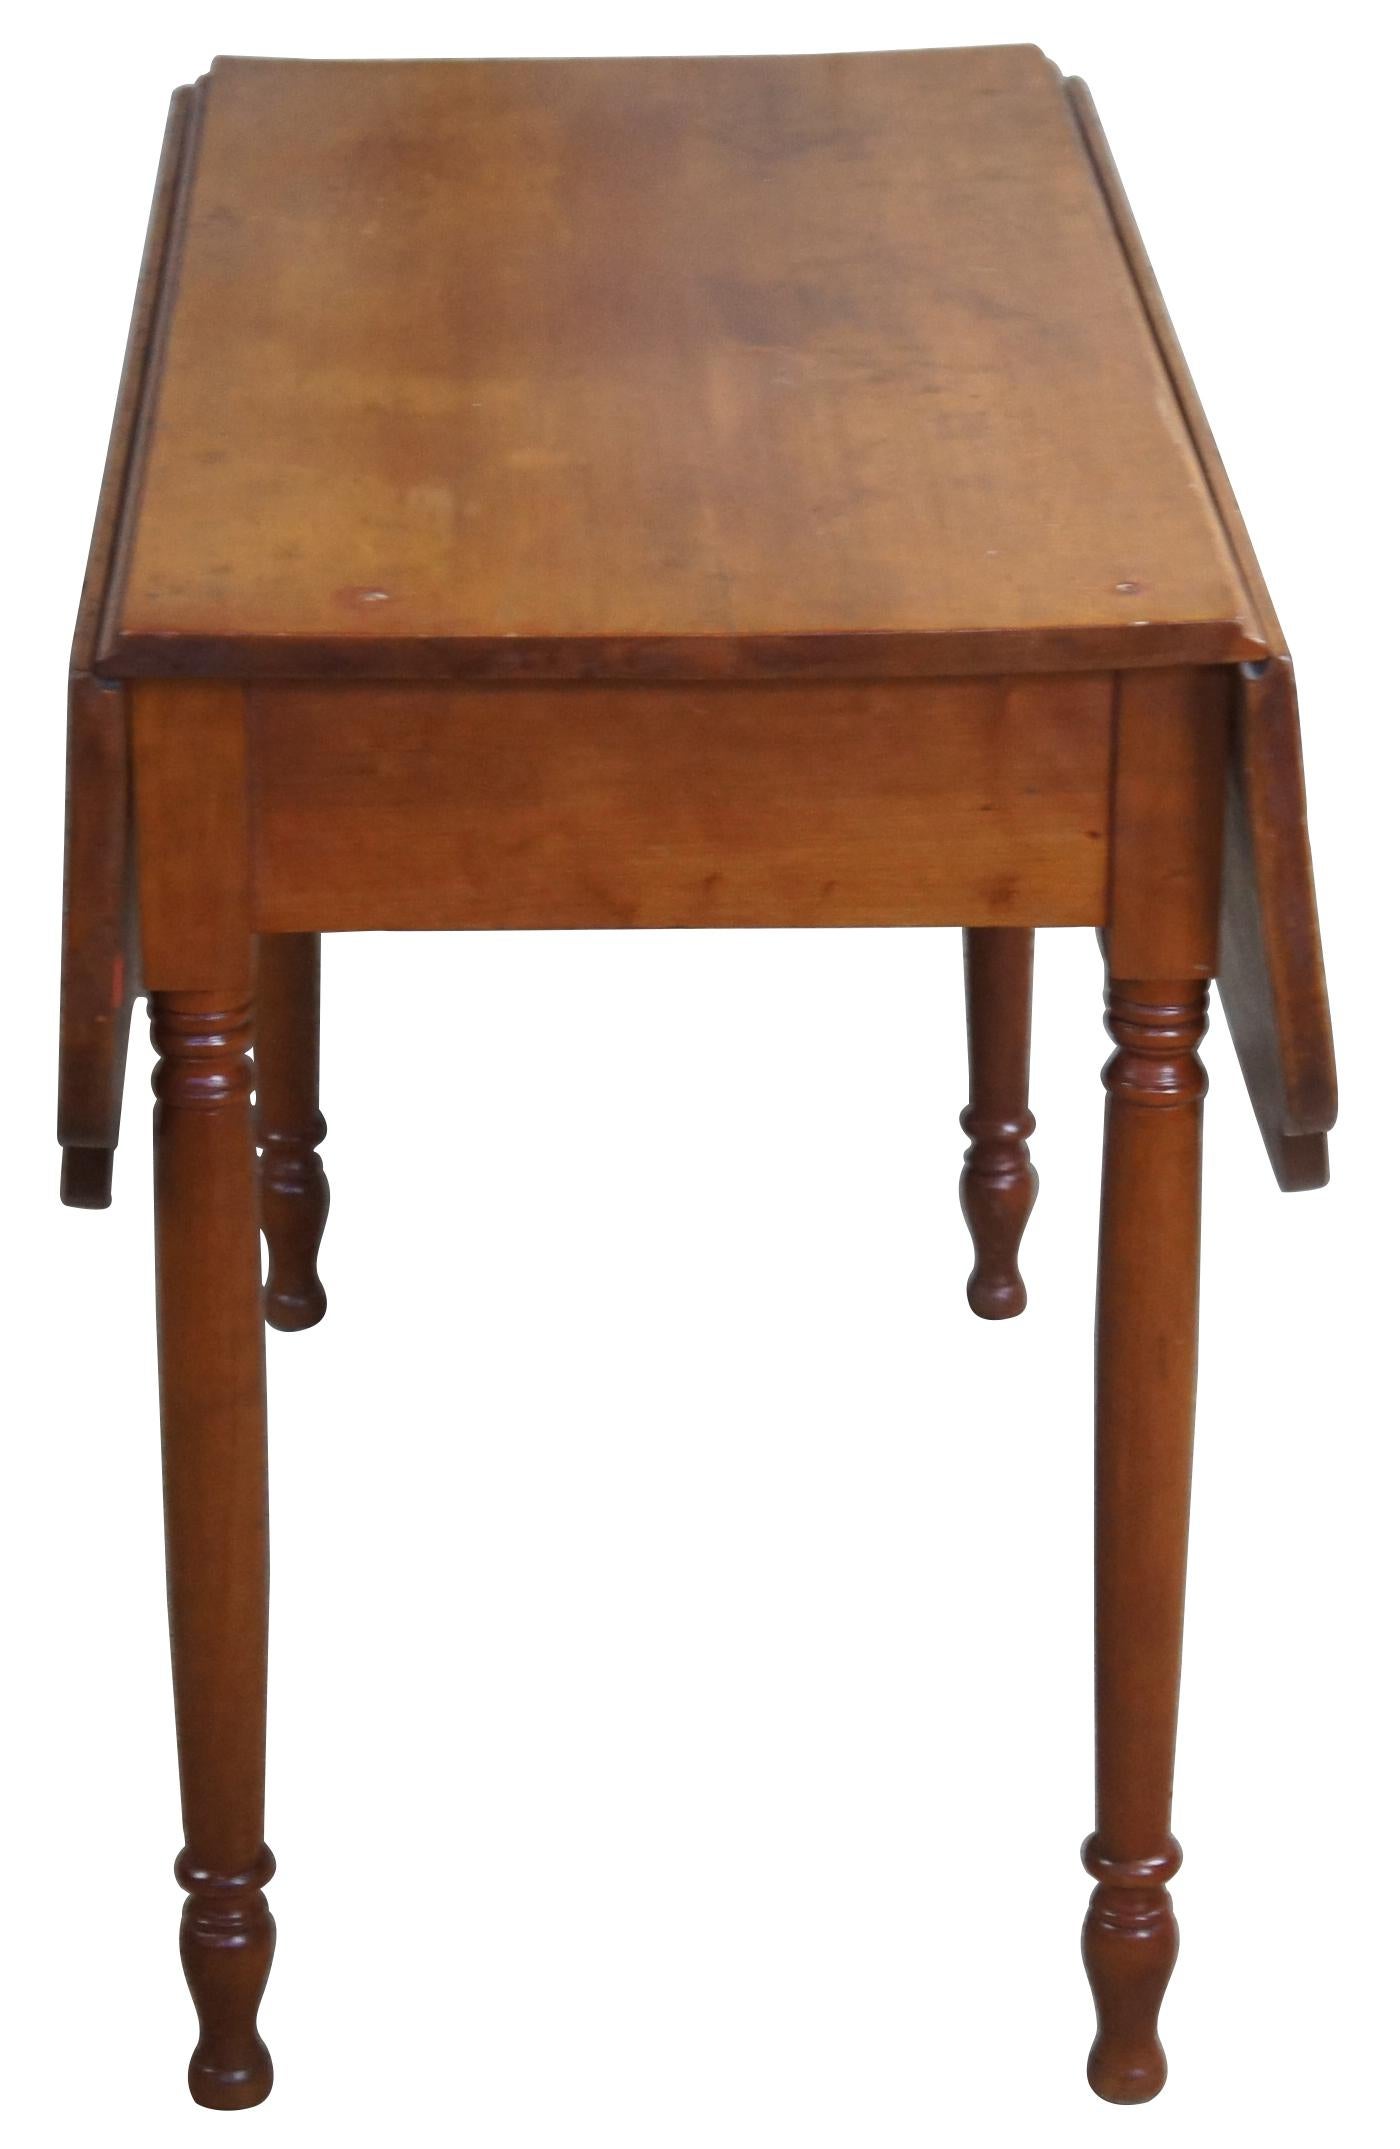 Late 19th century cherry drop-leaf table. Features a uniquely shaped top over turned legs leading to bun feet. 

Leaves add 12.5